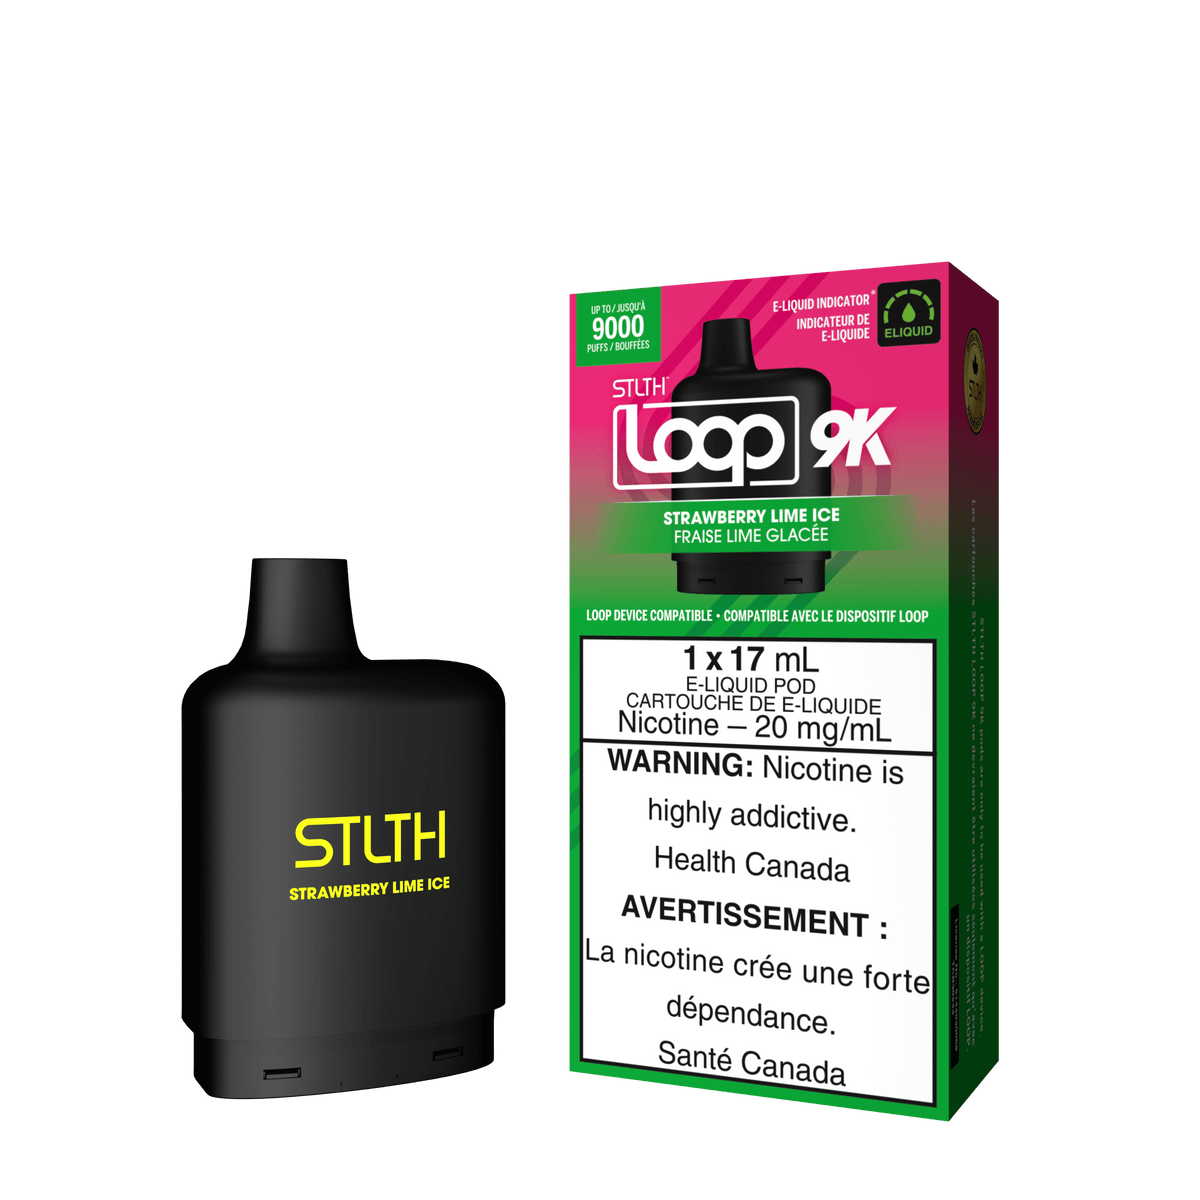 STLTH Loop 9K Pod - Strawberry Lime Ice available on Canada online vape shop